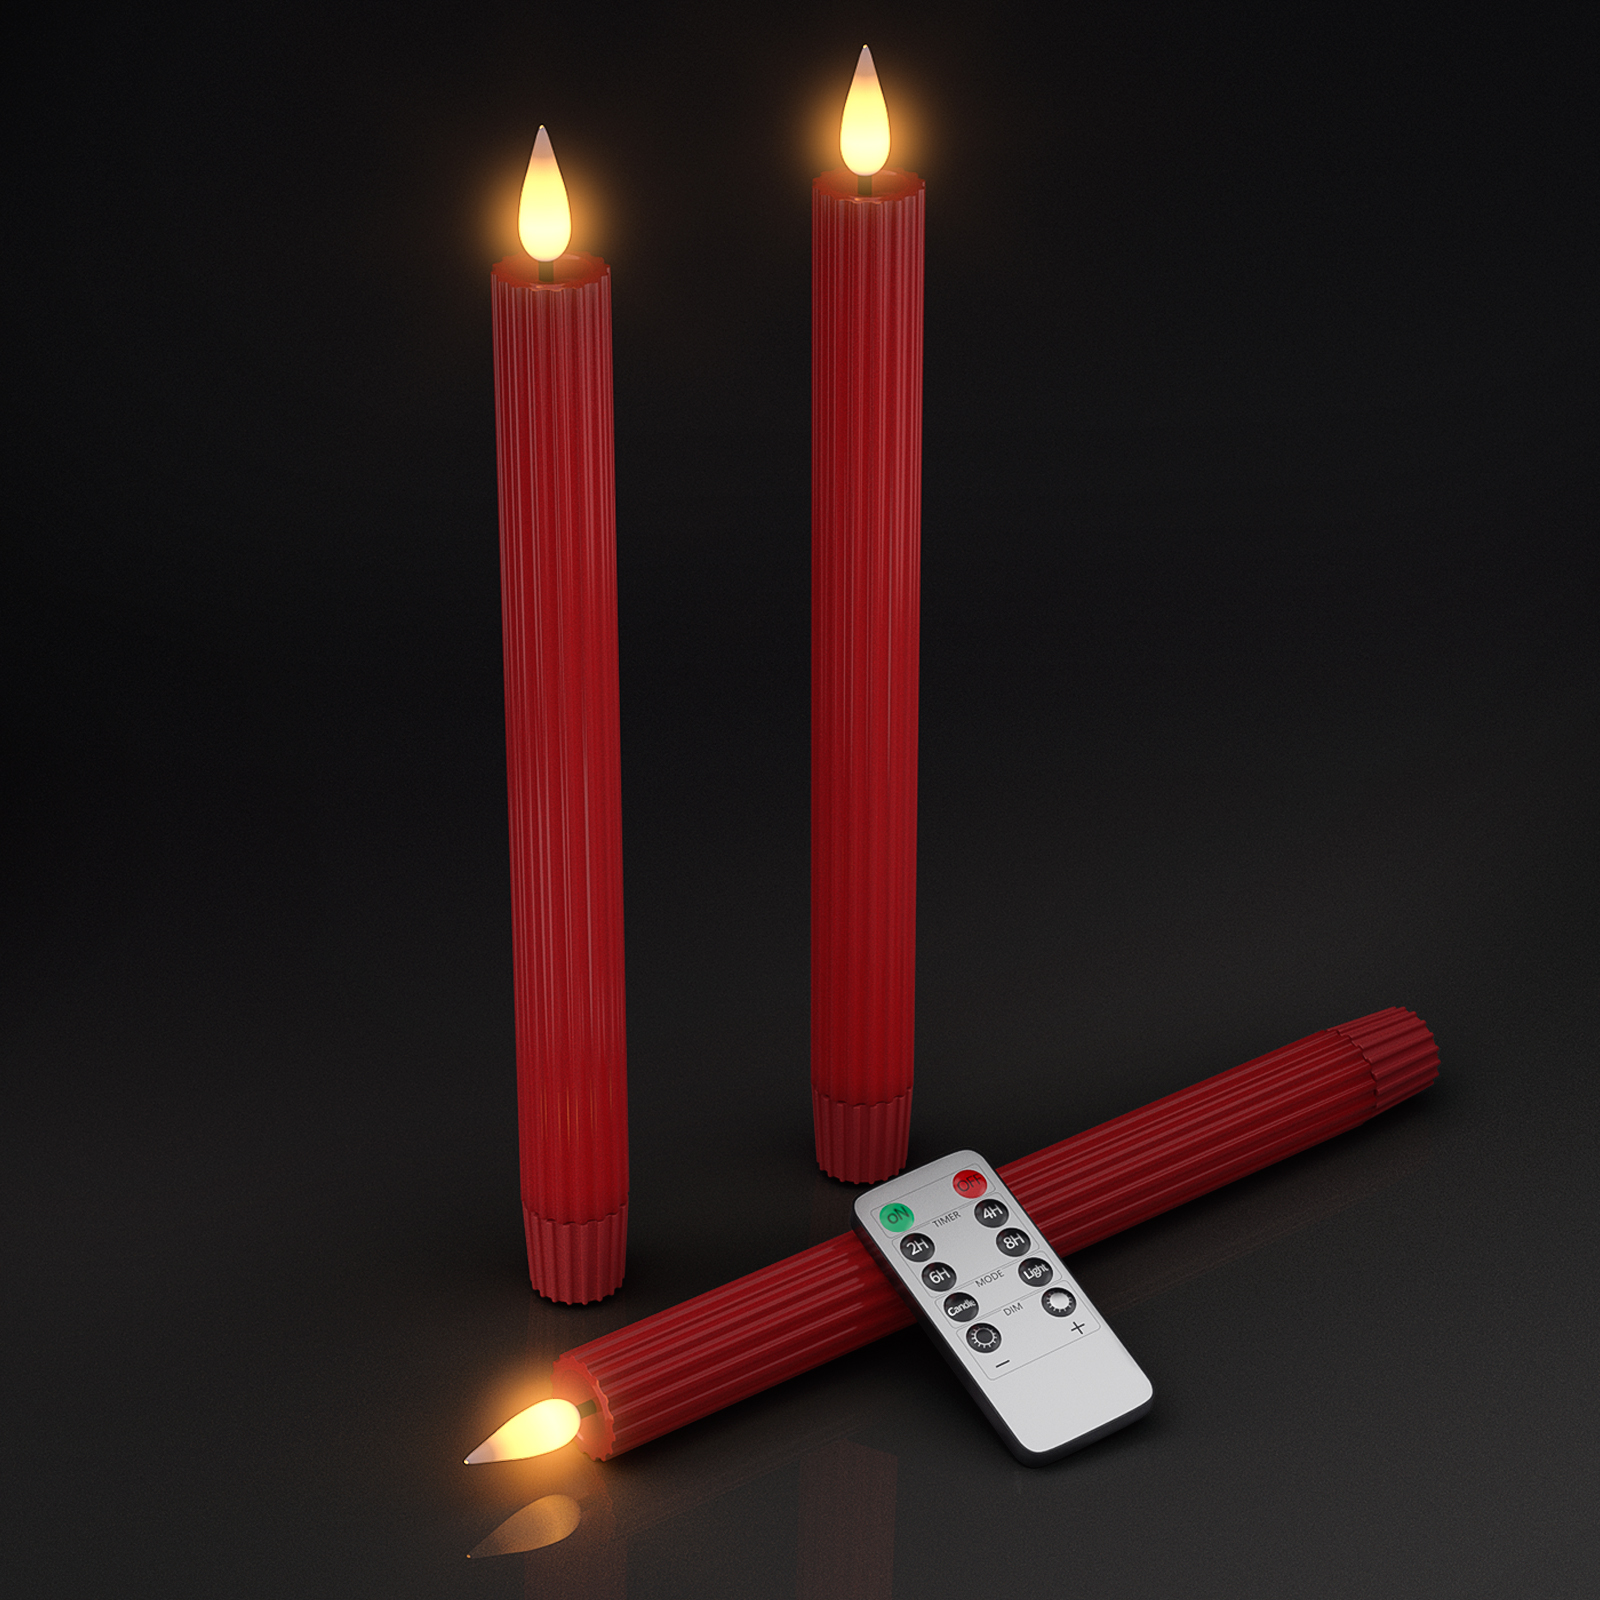 Real Wax LED Taper Candles, Ymenow 3pcs Red Stripe Battery Operated Flameless Candlesticks LED Window